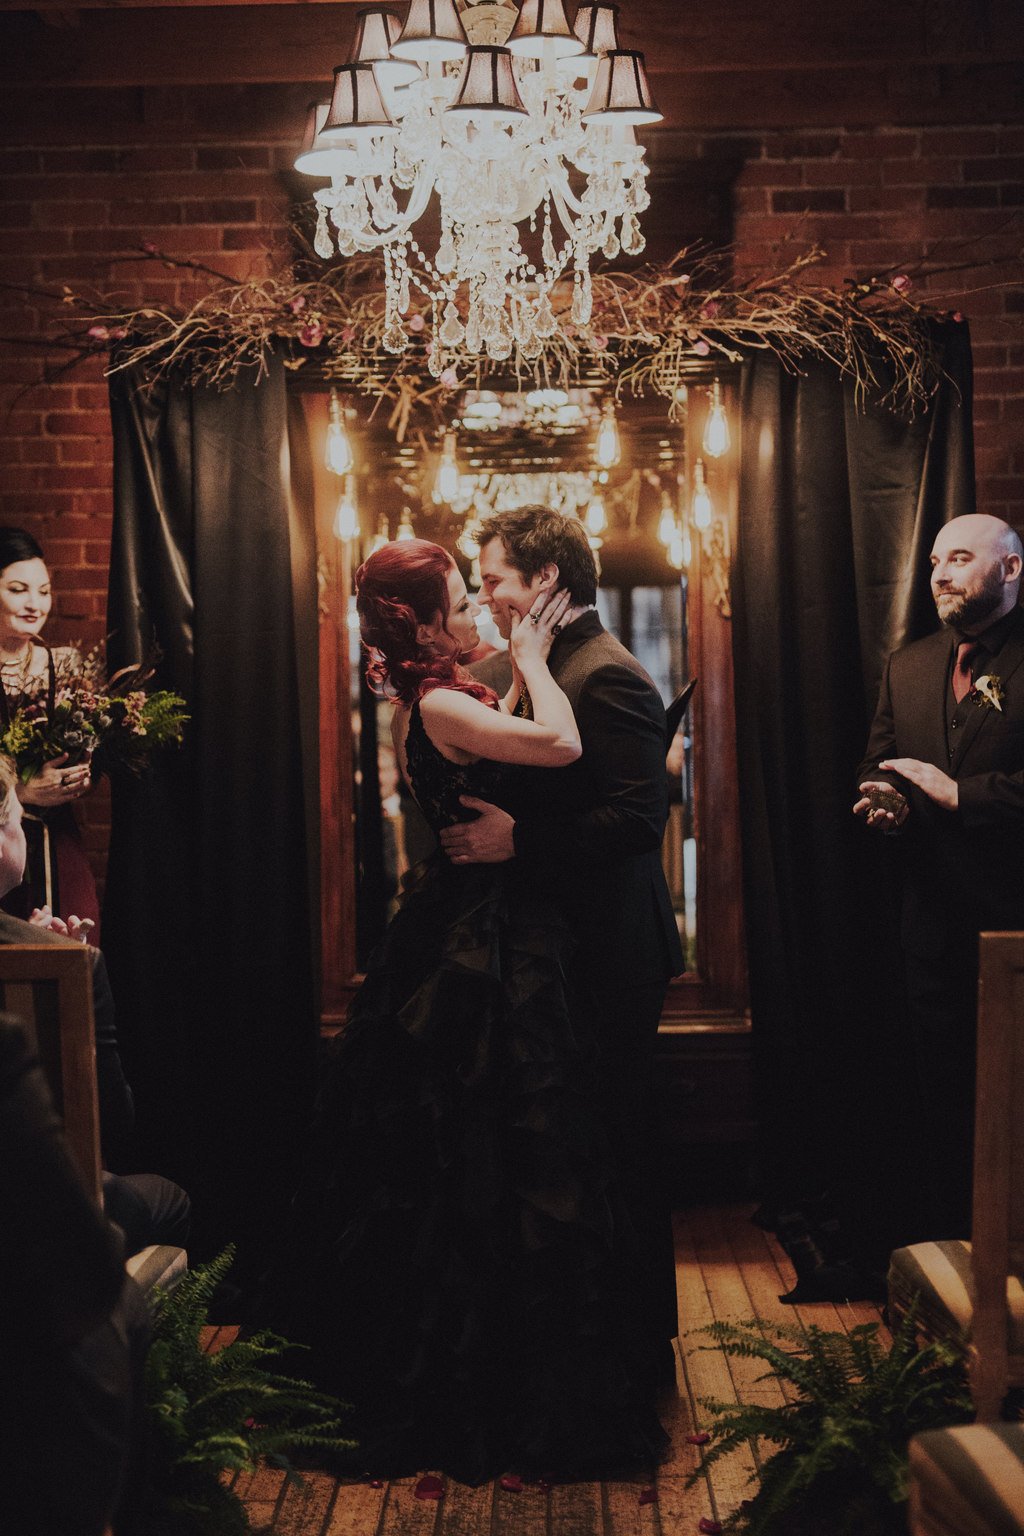 A Moody Spring Wedding at a Happily Haunted Mansion in LA